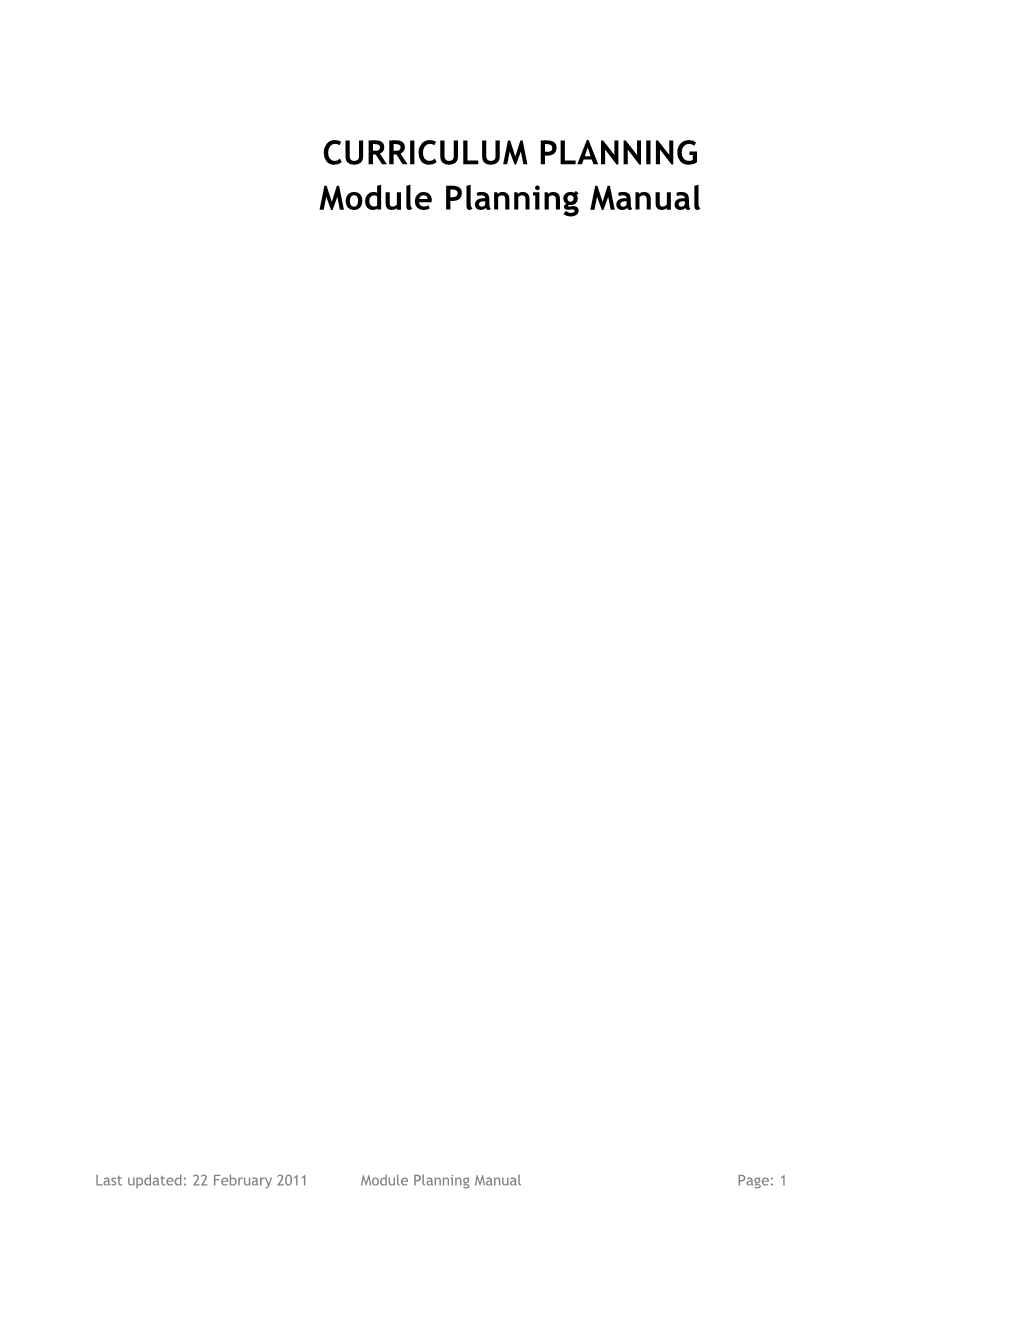 SECTION 1: About Module Planning